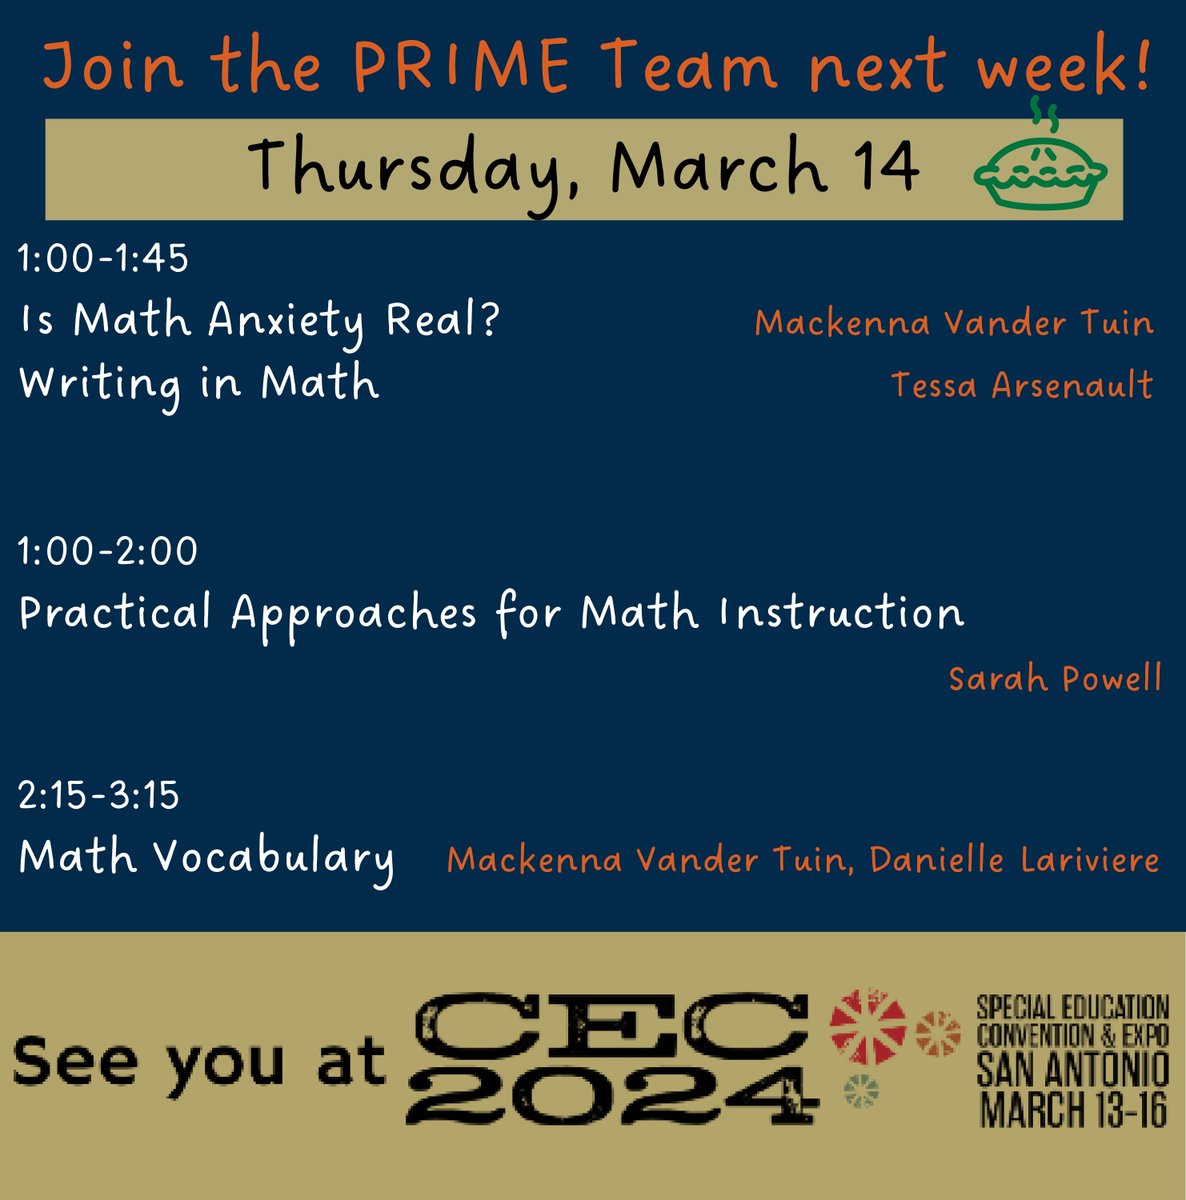 And here's the #PRIMETeam schedule for Thursday afternoon. It will be pi day - come talk math with us!